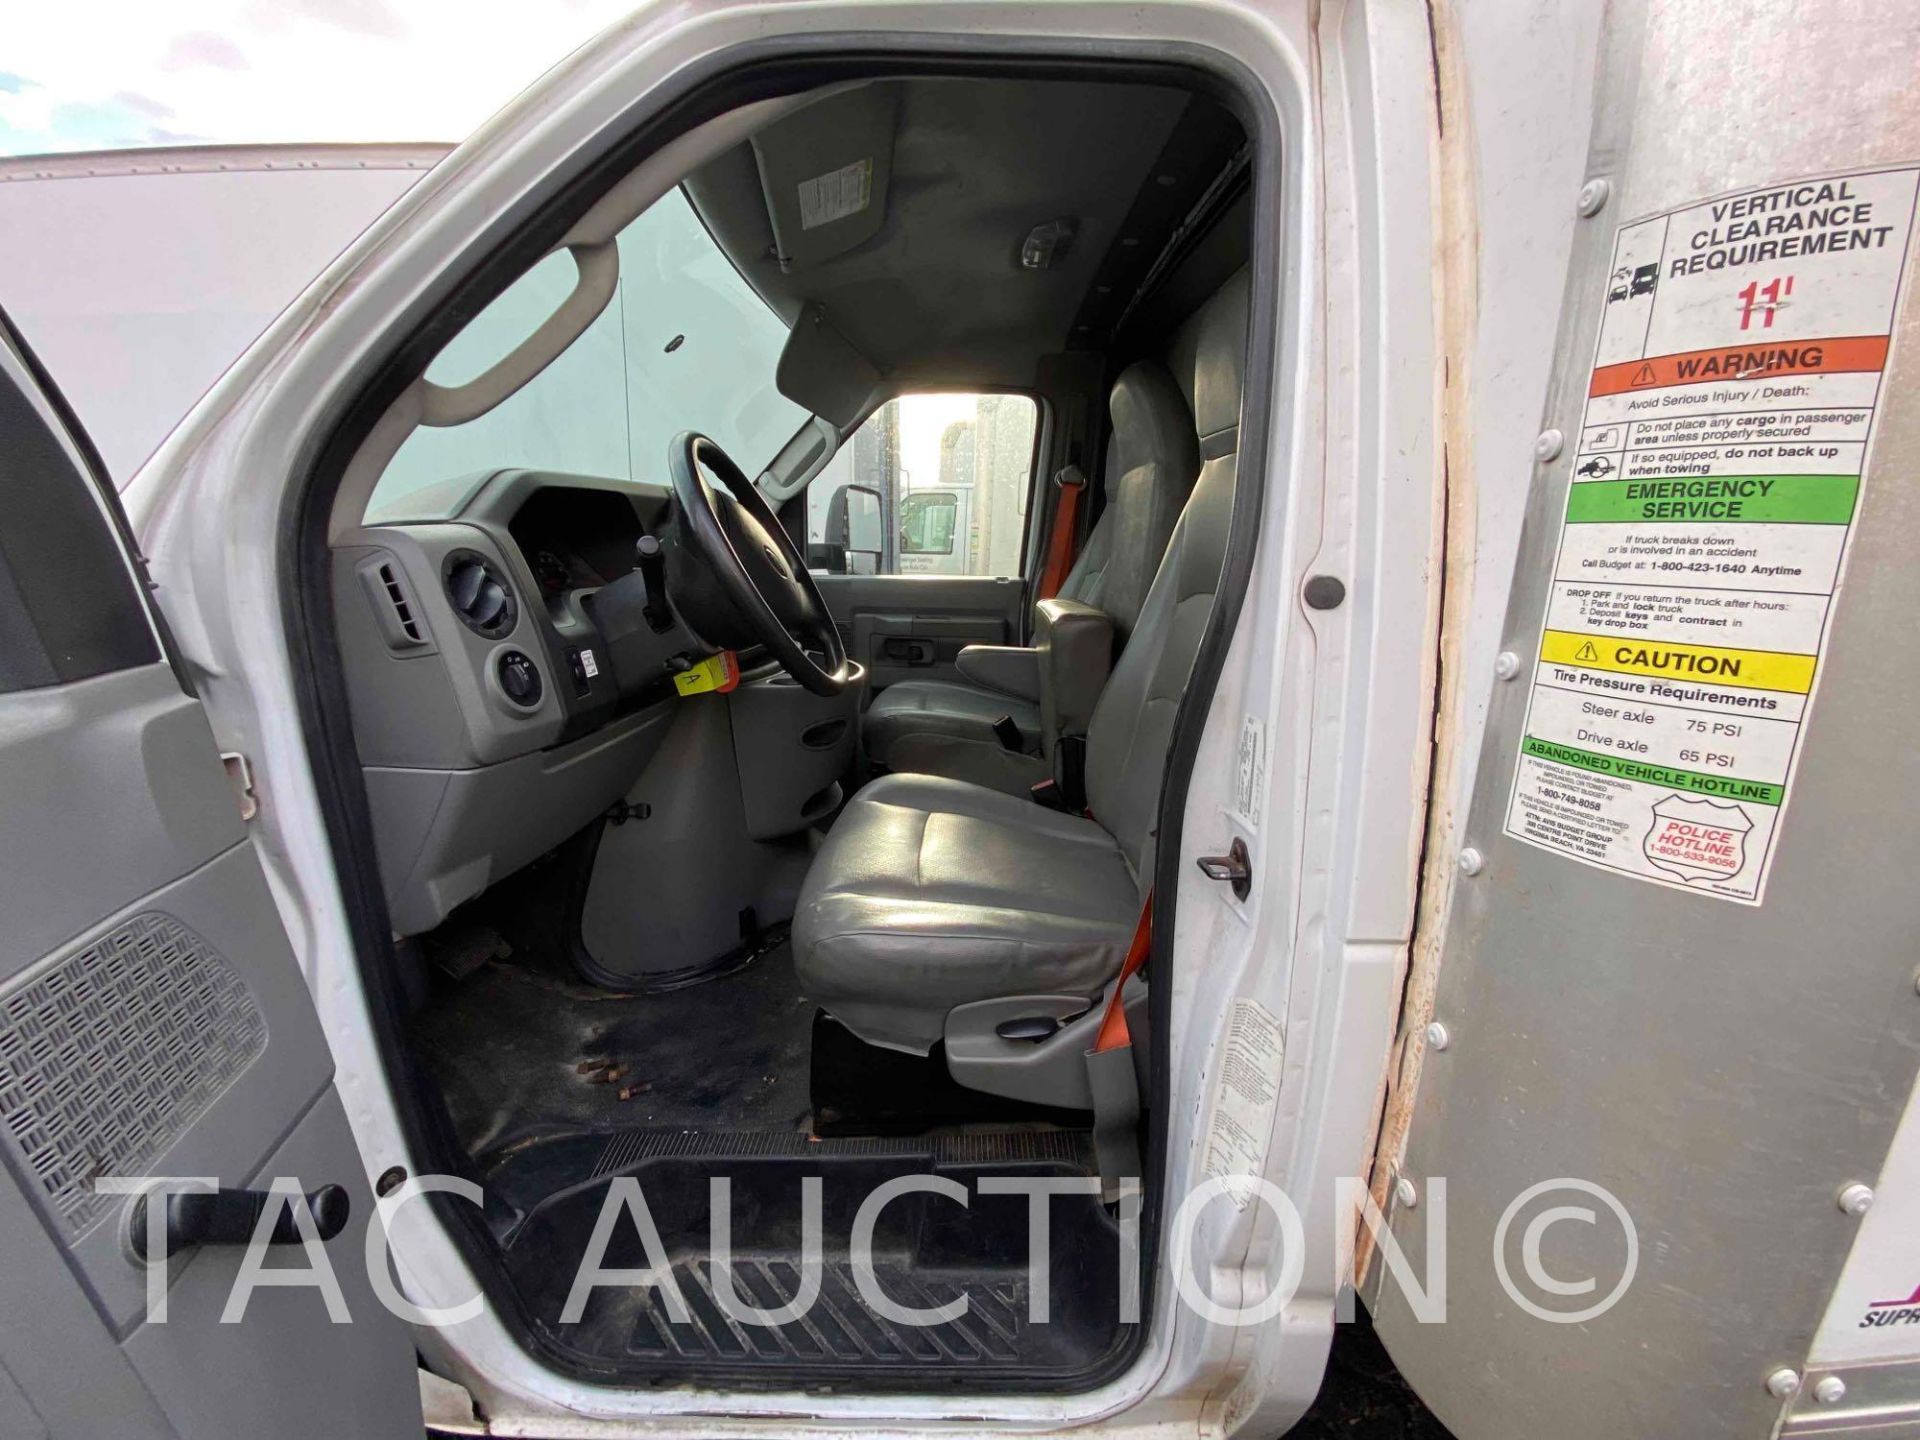 2015 Ford E-350 16ft Box Truck - Image 12 of 46